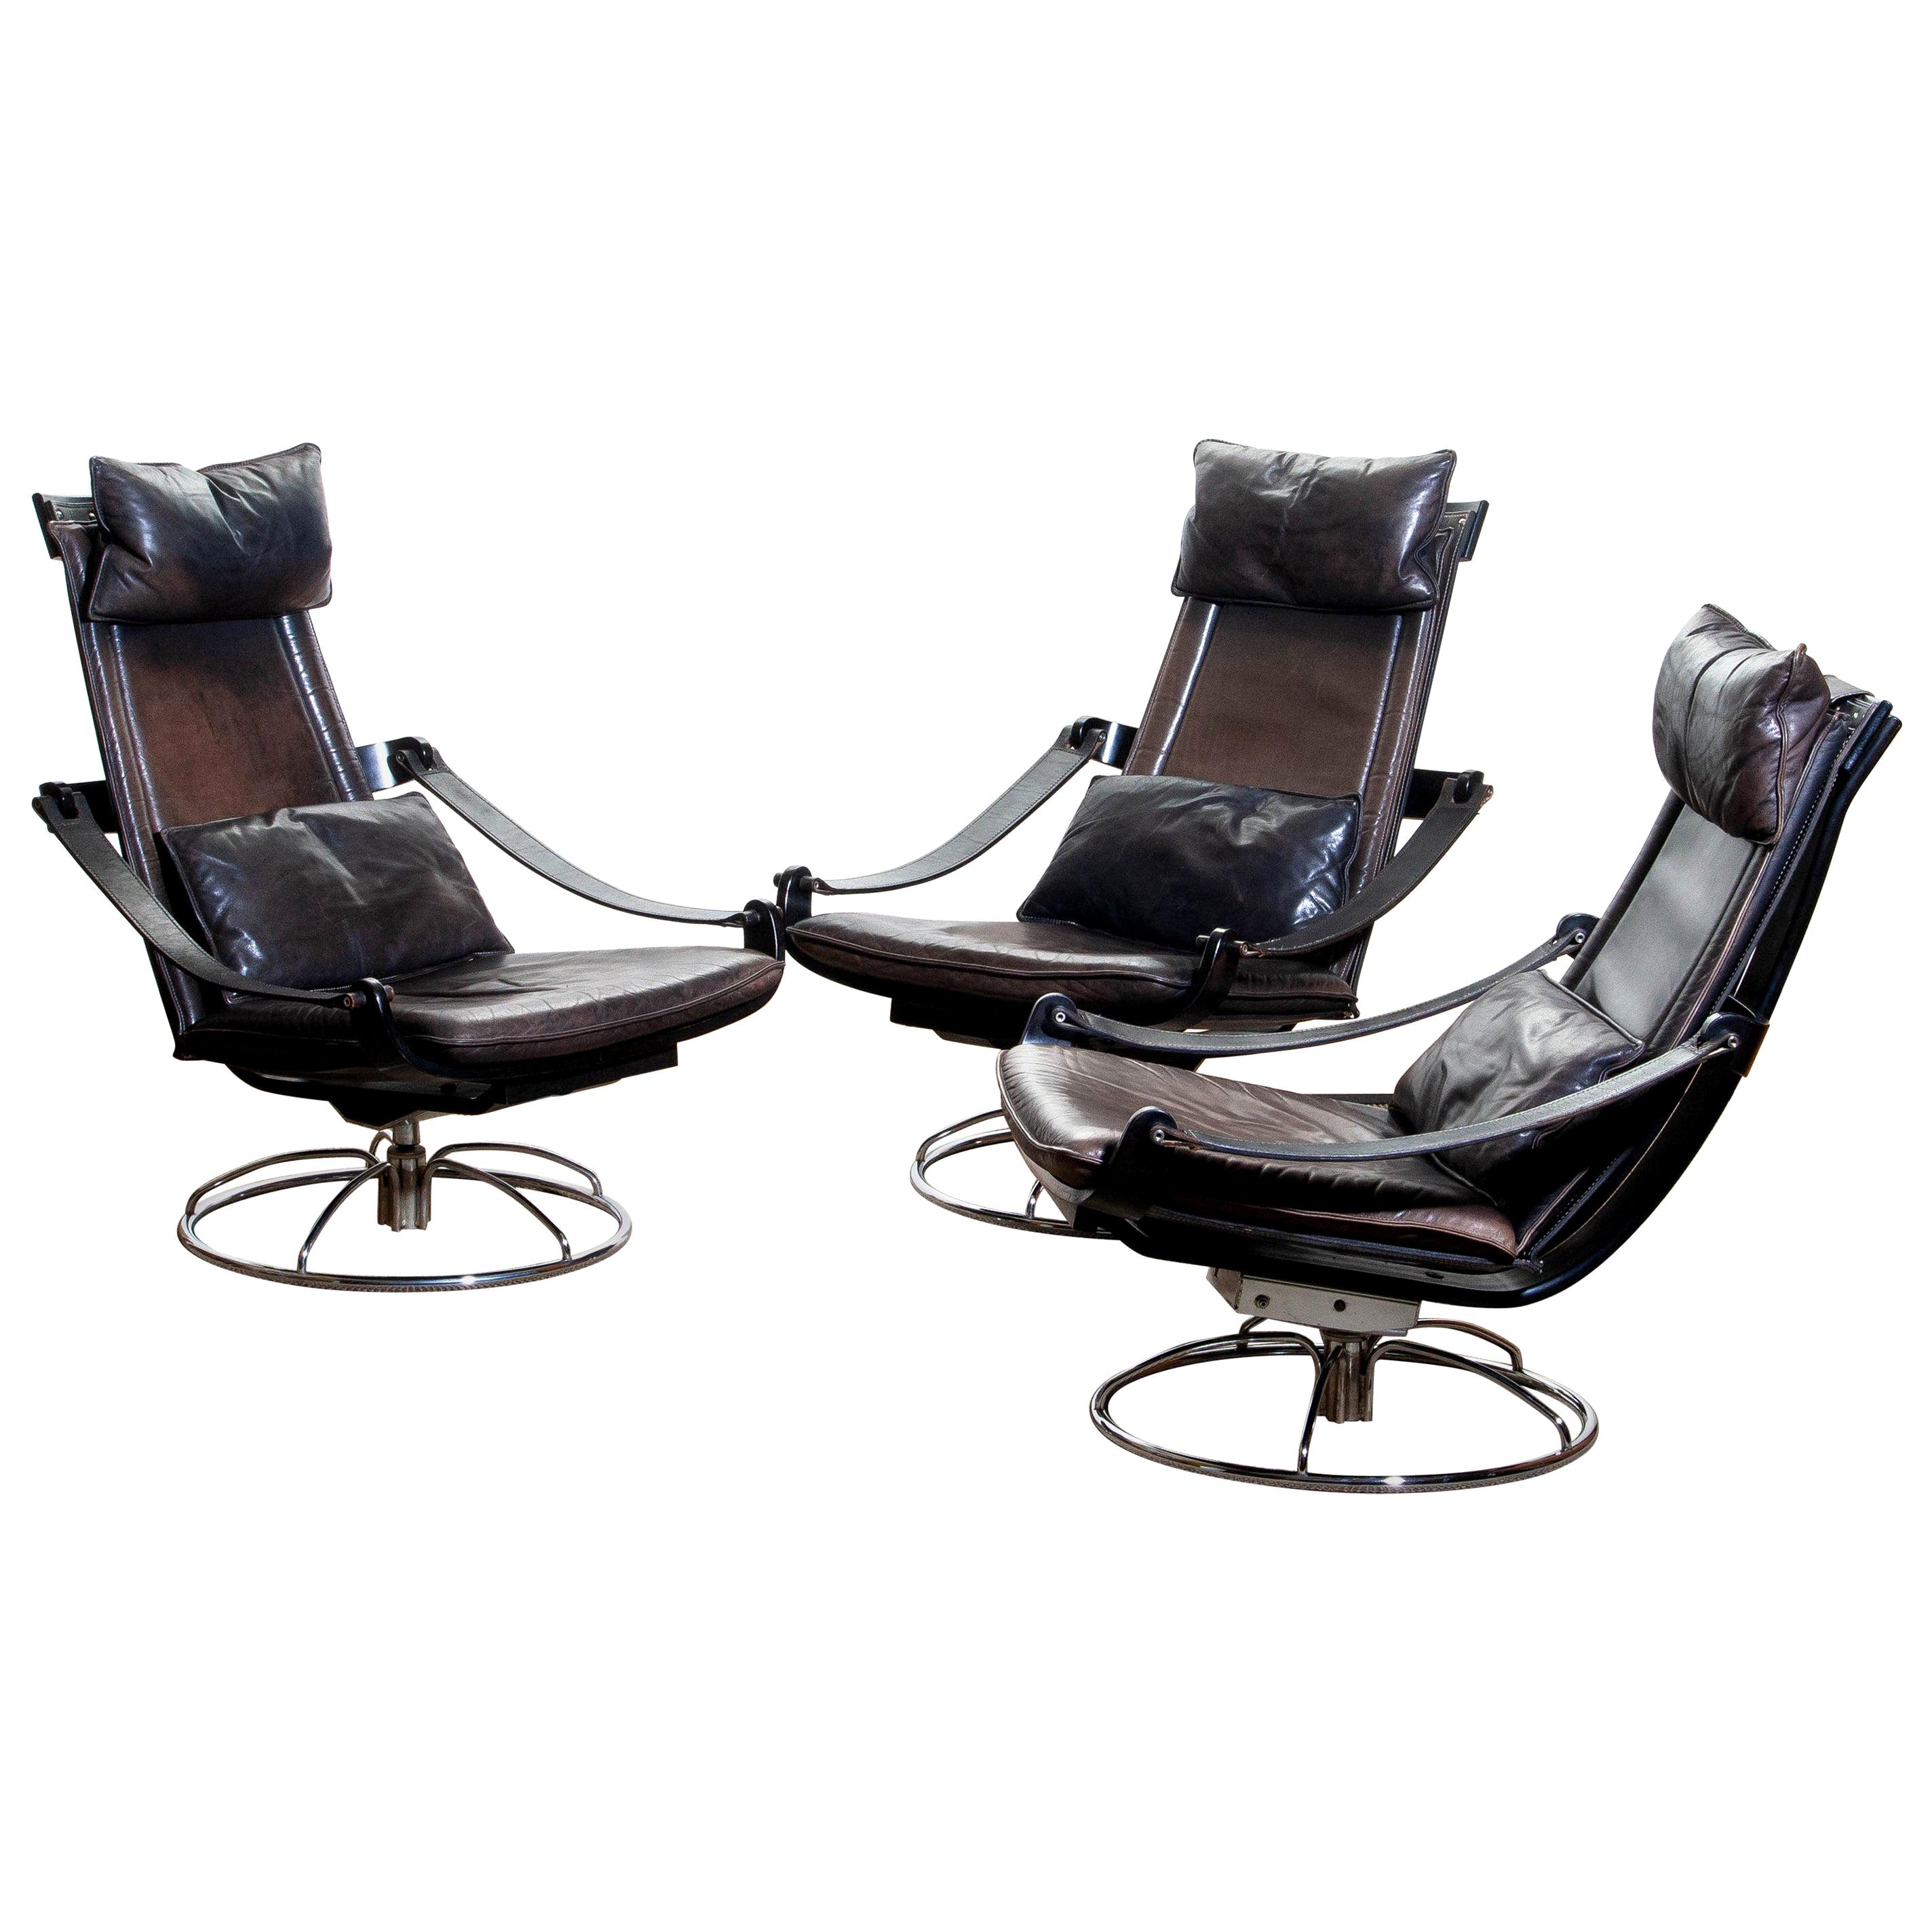 1970s, Three Leather Swivel / Relax Chairs by Ake Fribytter for Nelo, Sweden